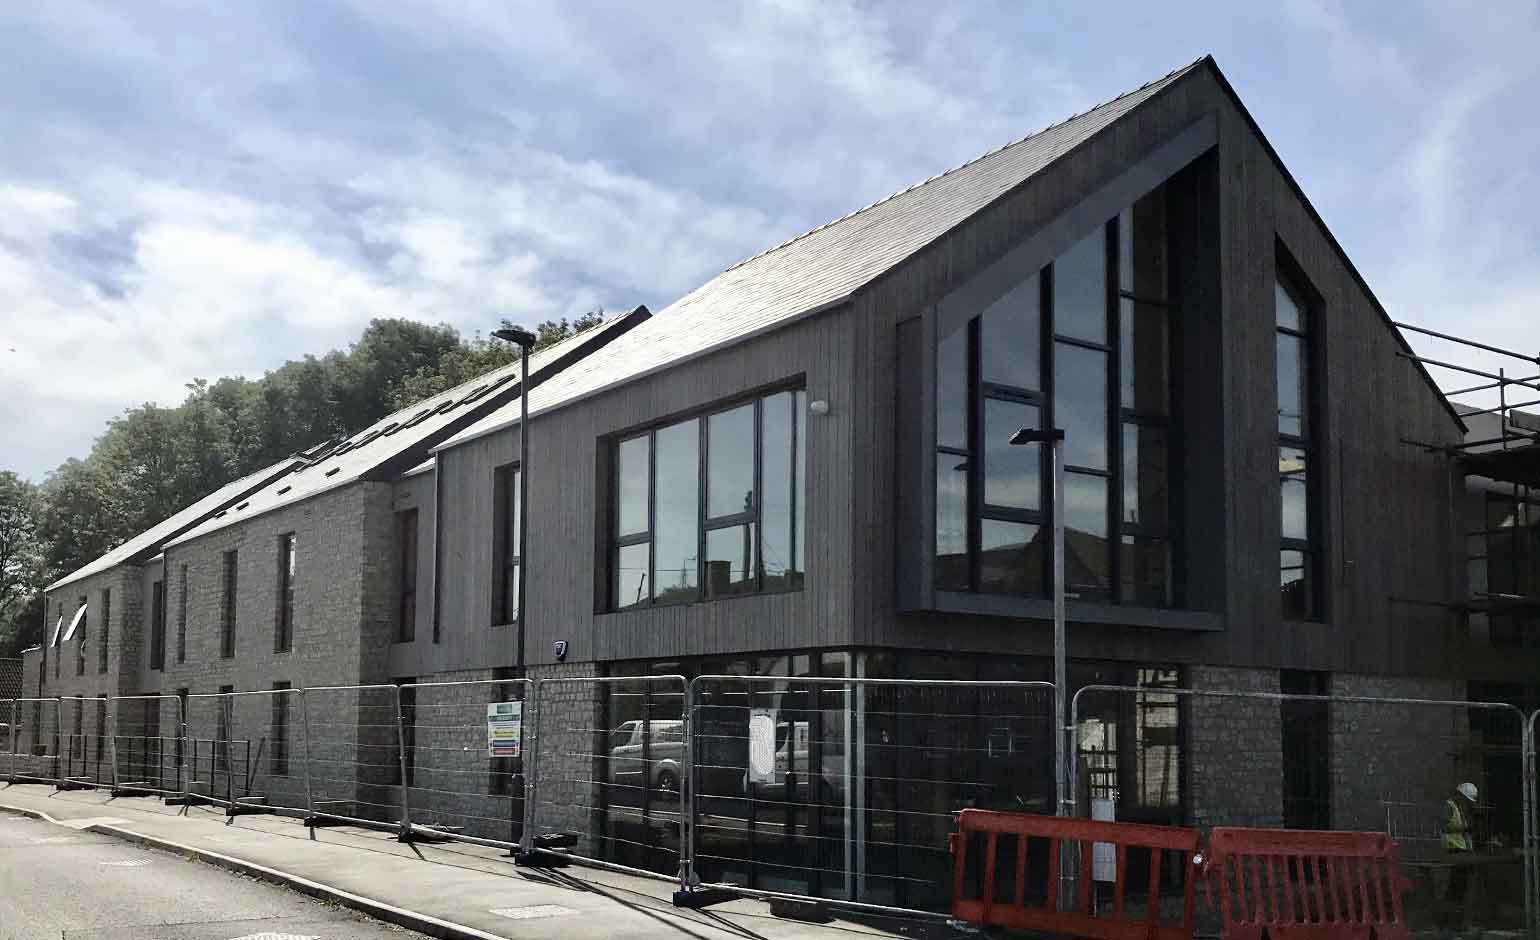 New health and wellbeing centre set to open in Radstock next month